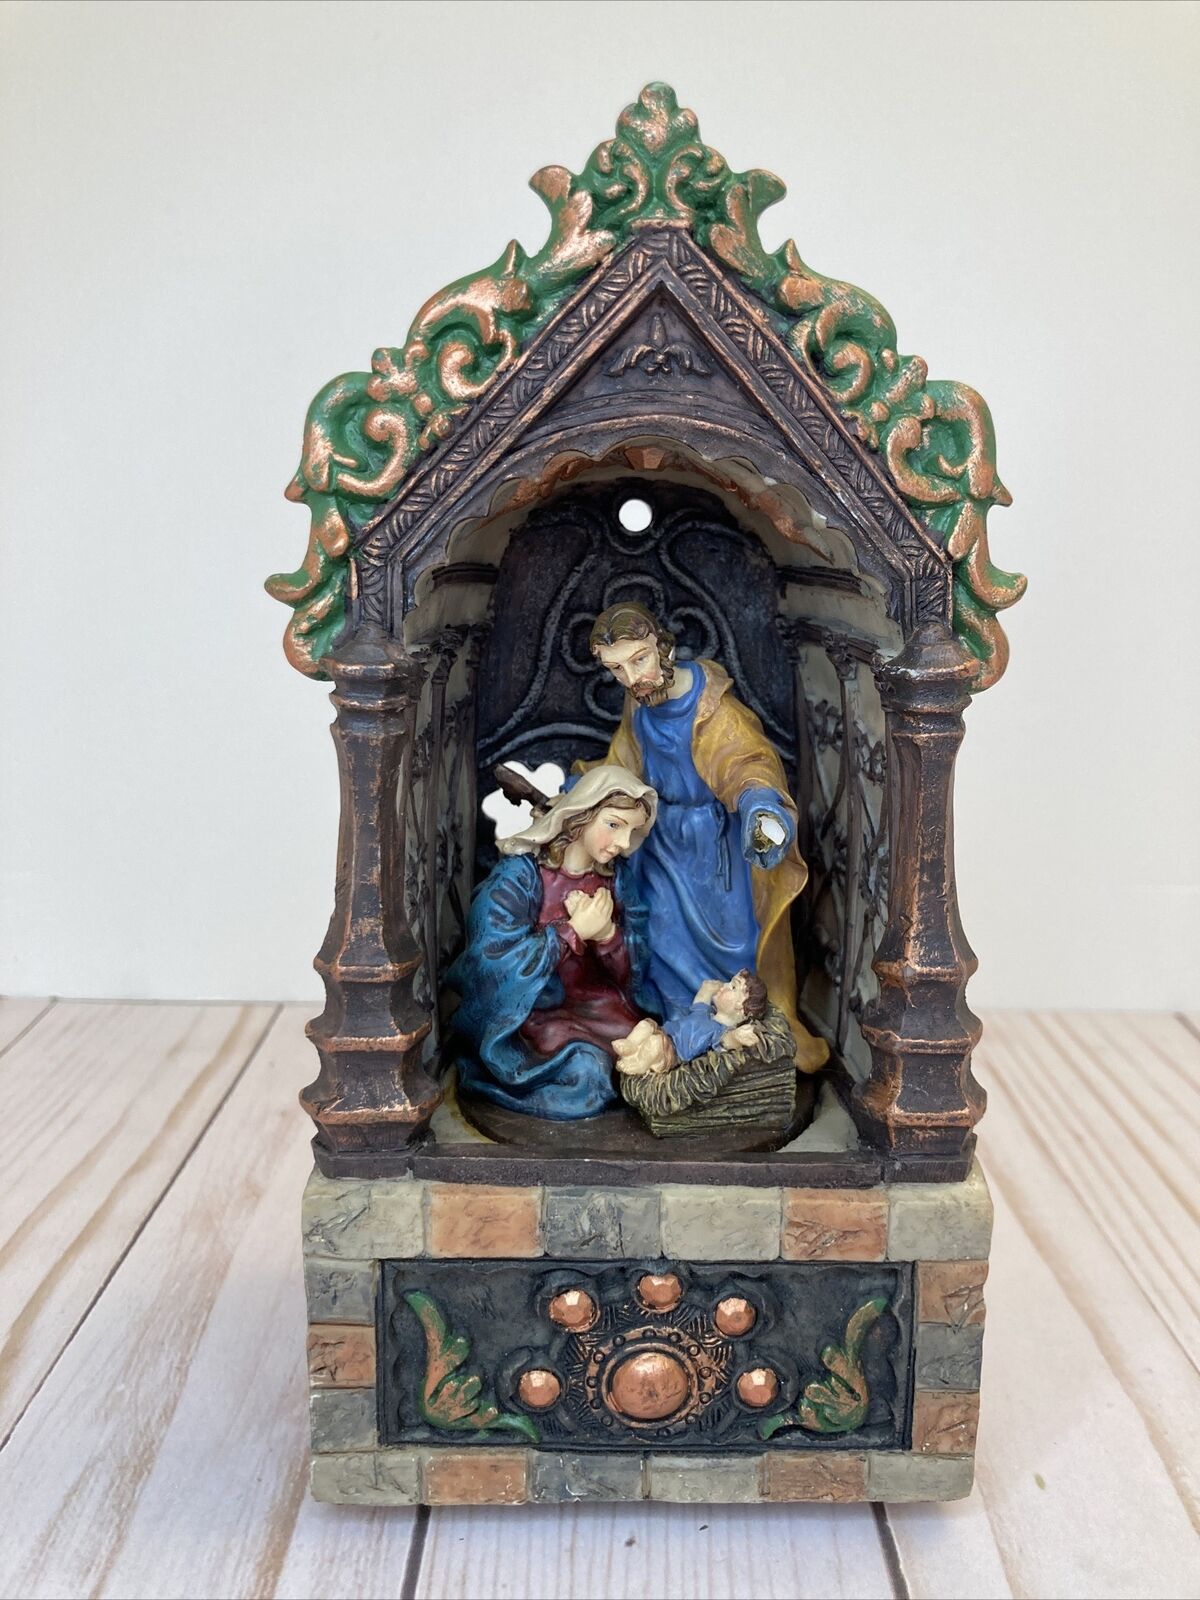 Holy Family Nativity Music Box Plays “Silent Night” Intricate Design (A5)